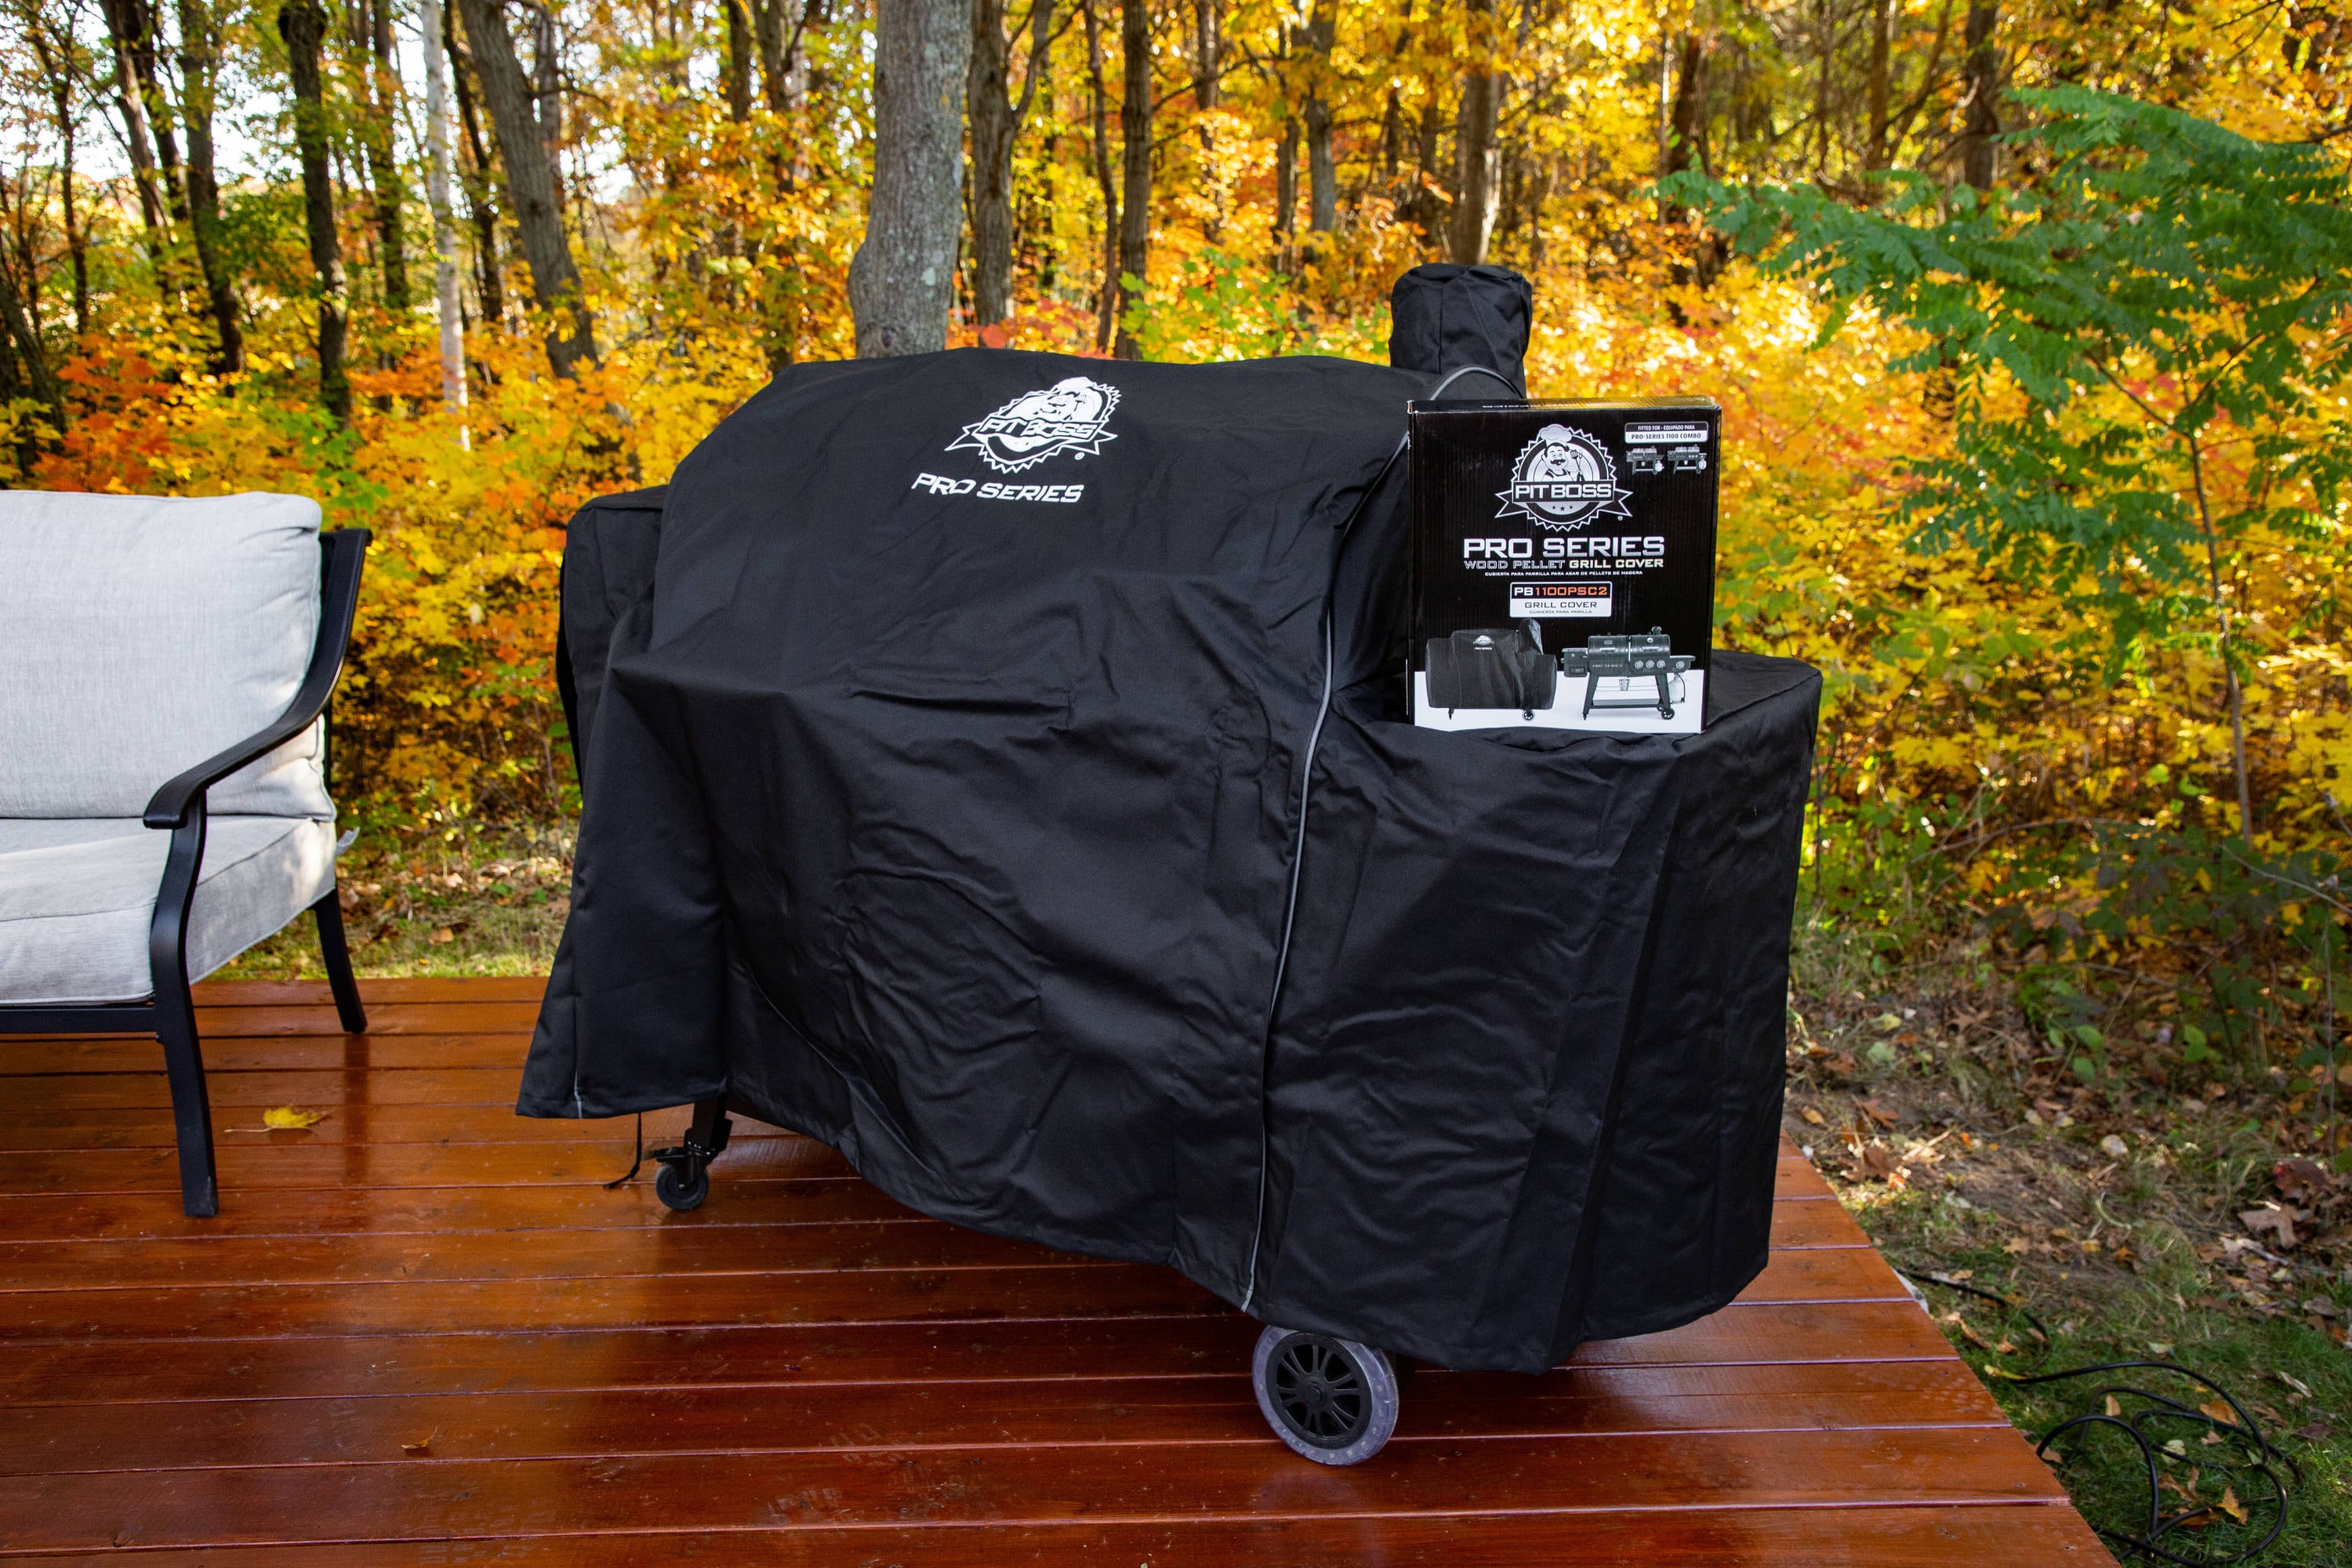 Pit Boss 700 Series Universal Grill Cover at Tractor Supply Co.